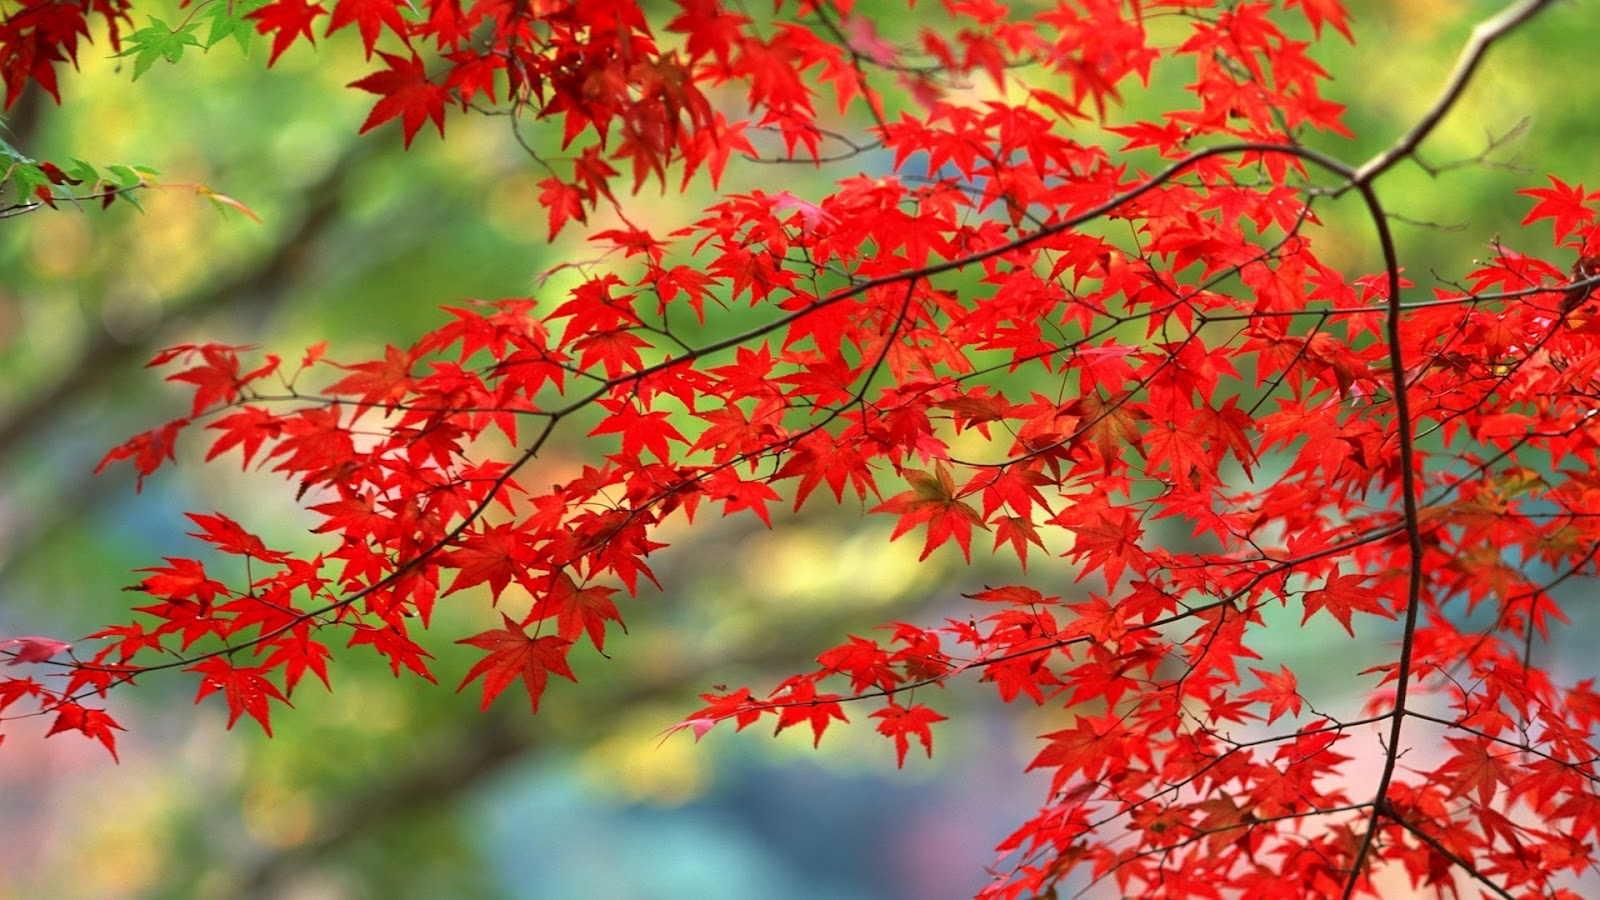 Red Autumn Leaves Wallpaper Pictures In High Definition Or